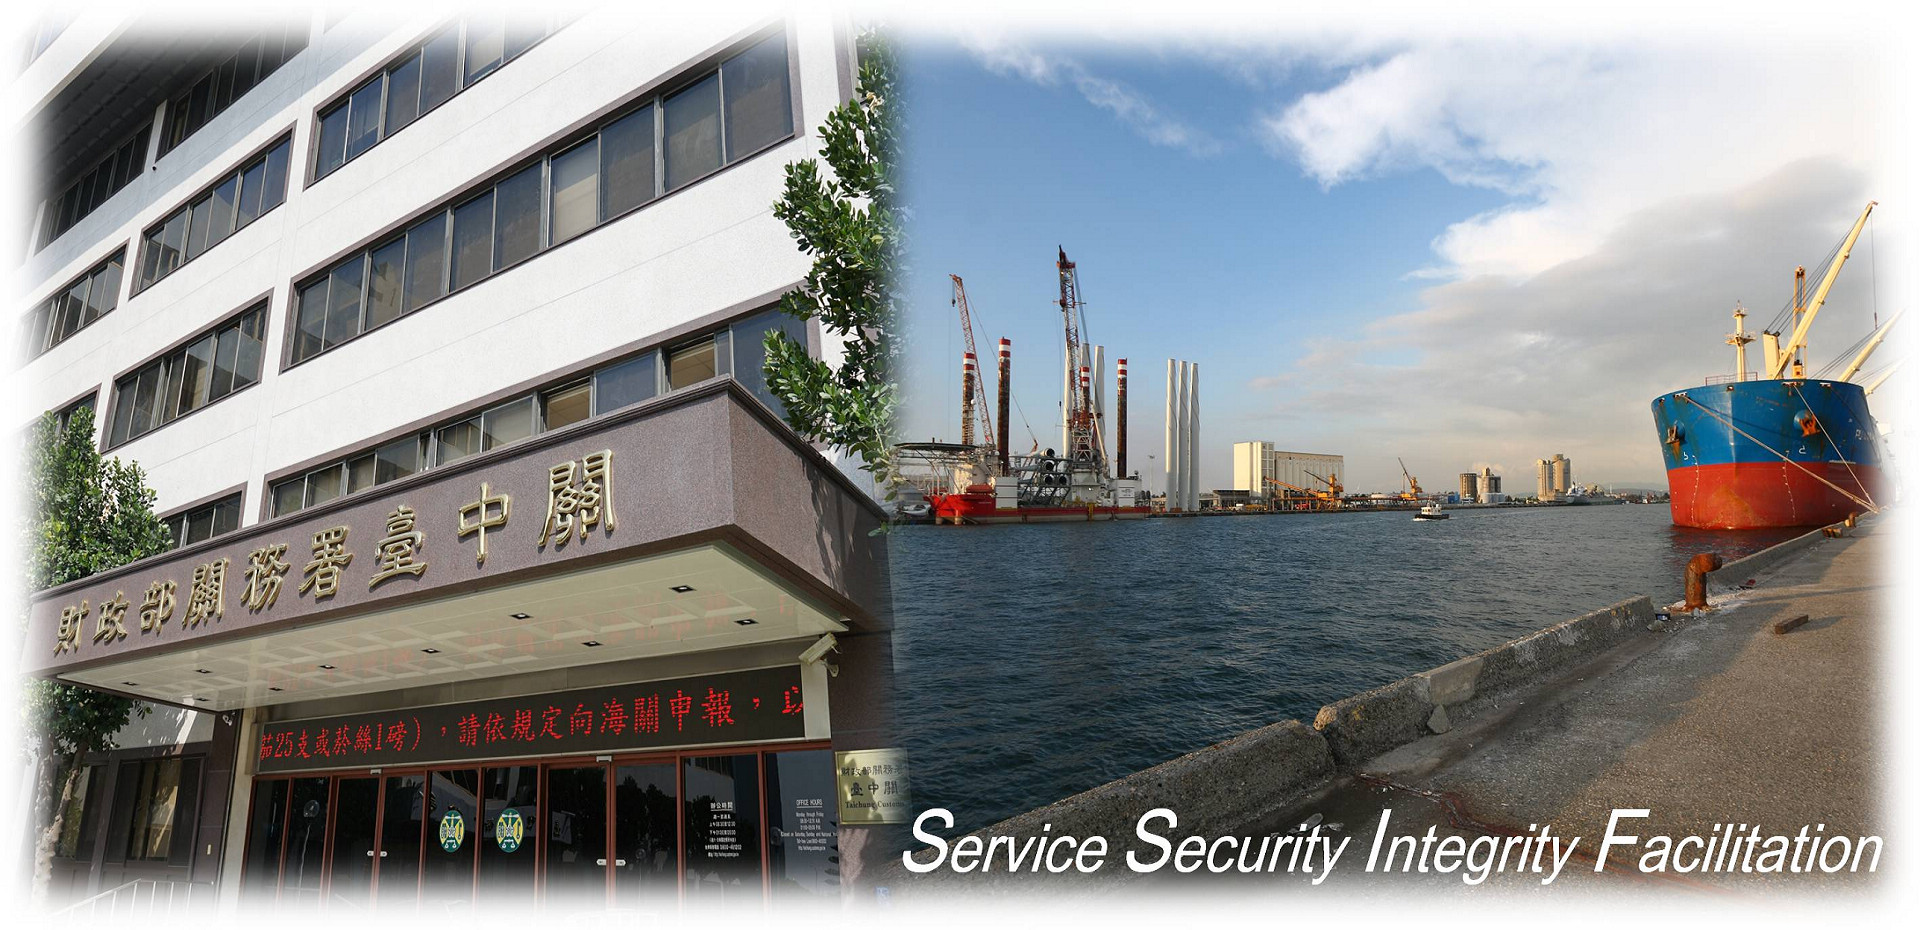 About Taichung Customs